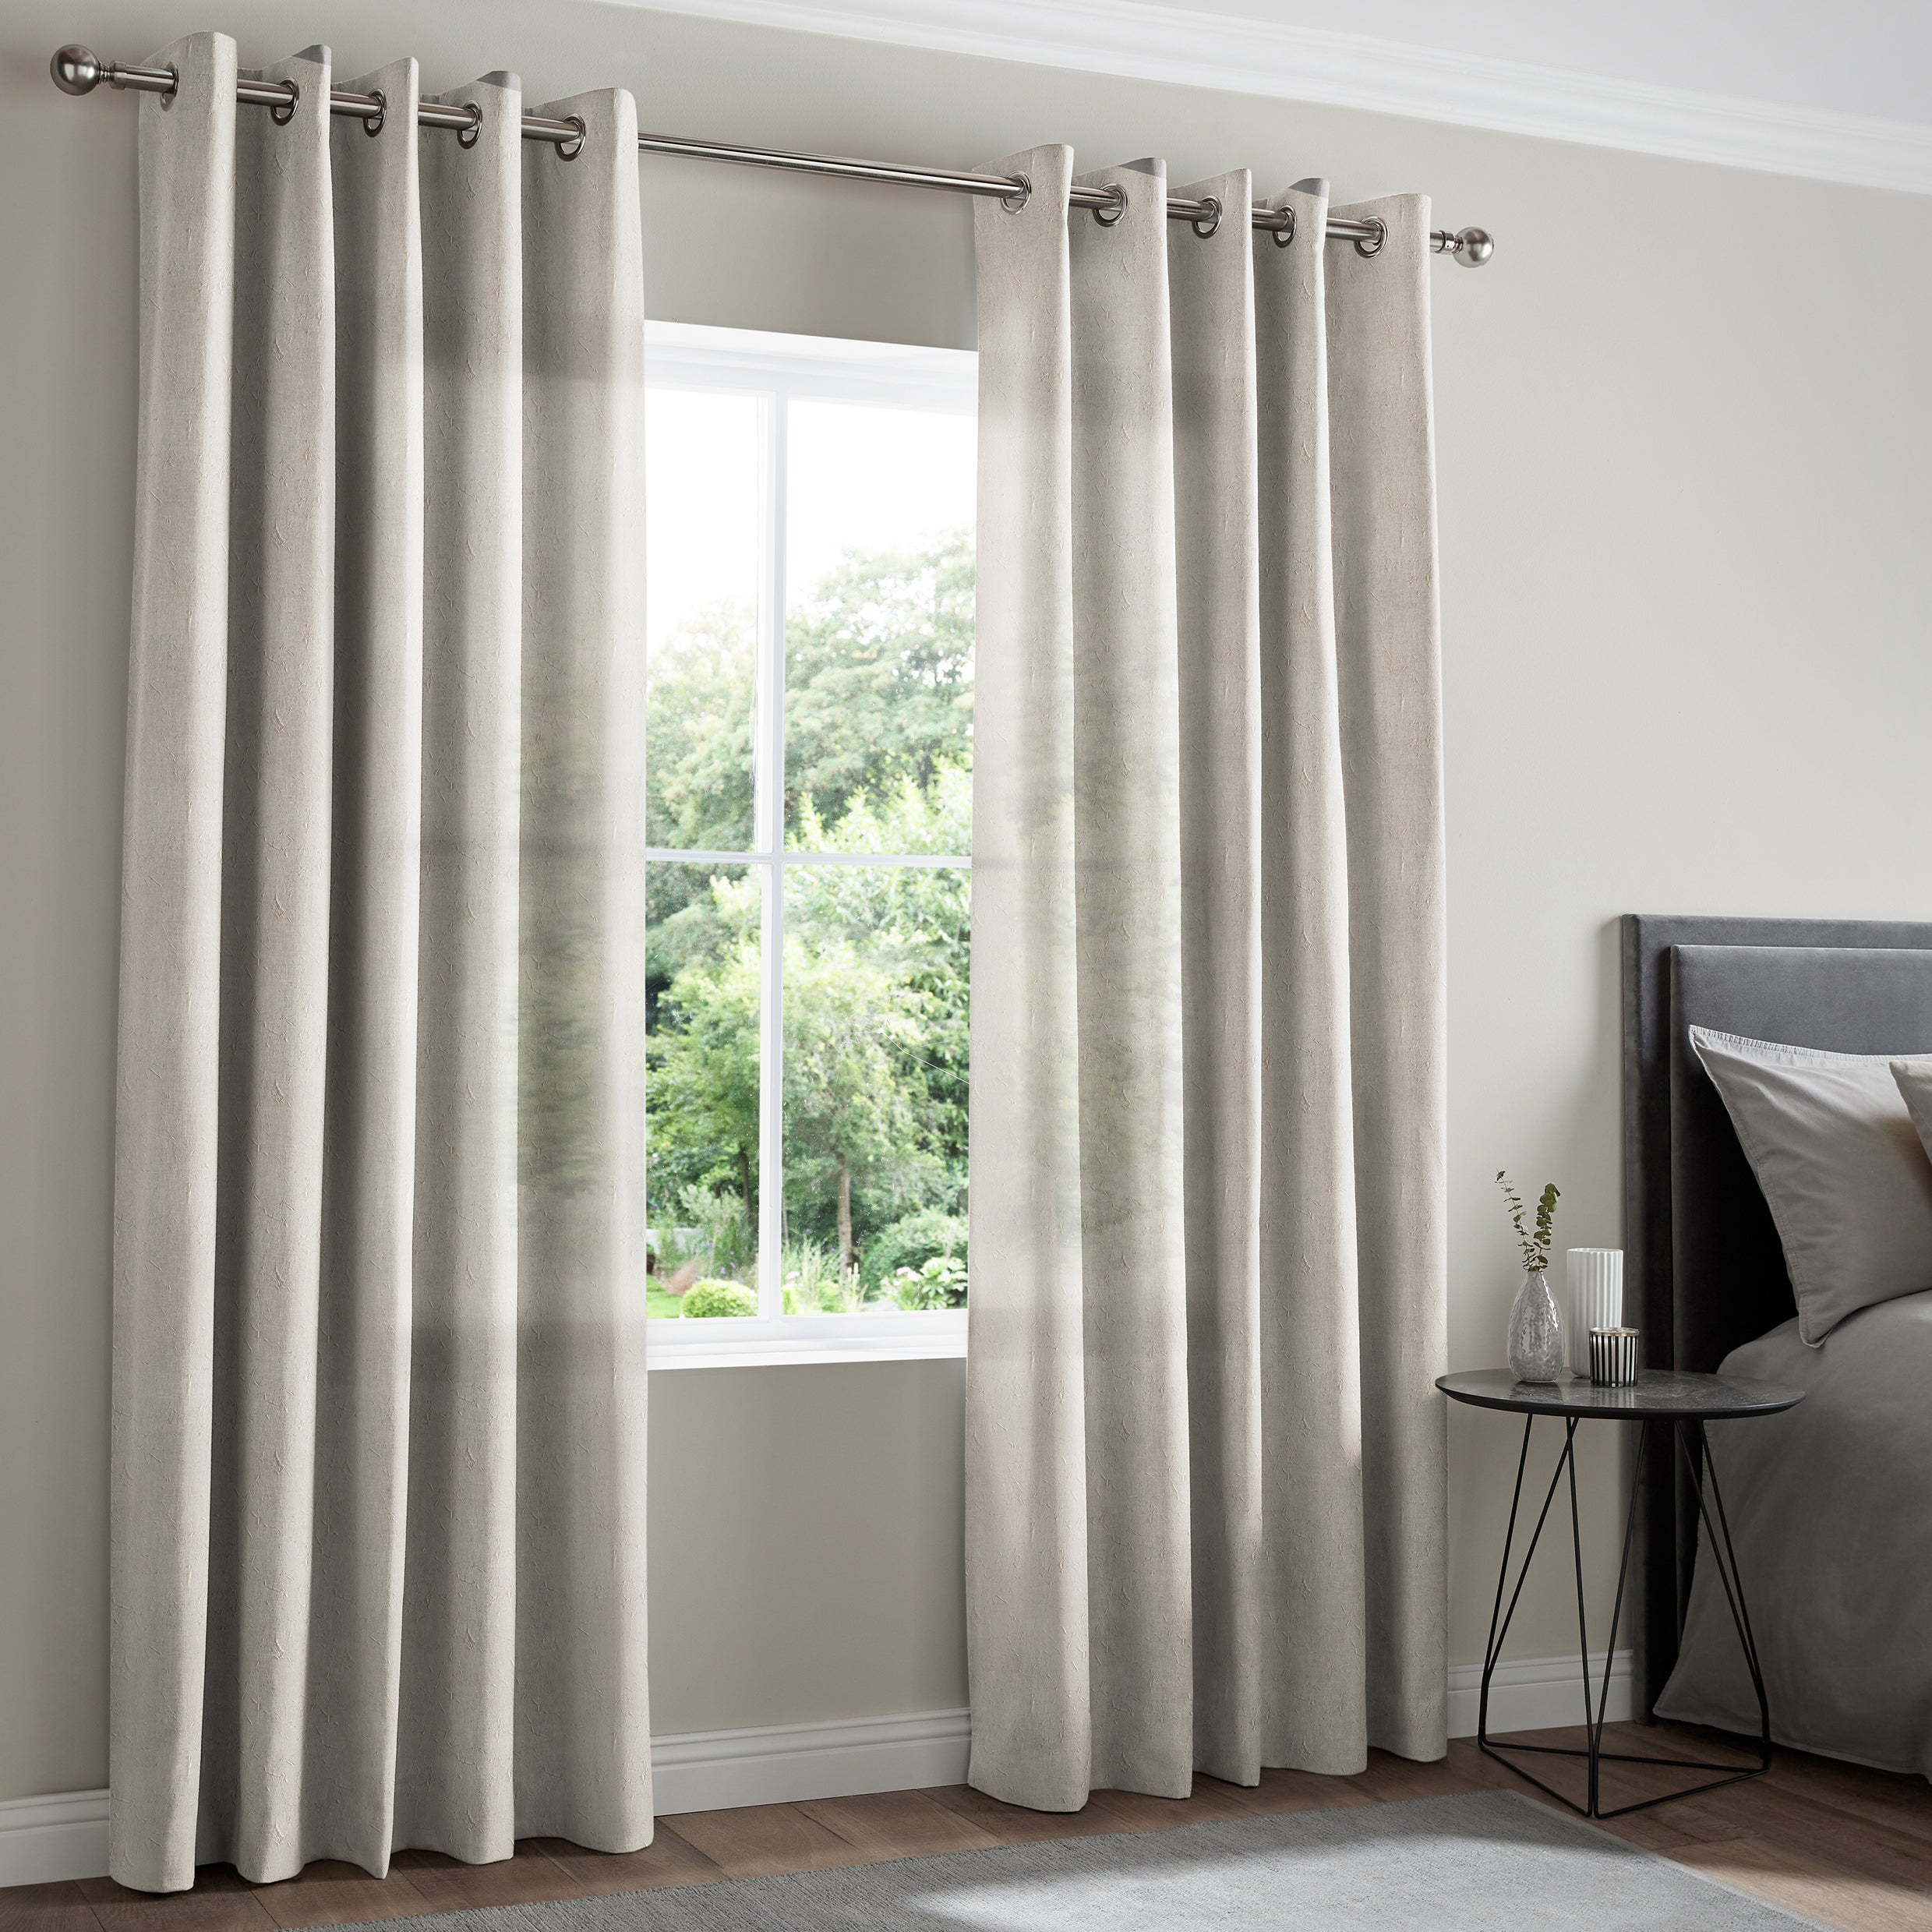 Eloise Made To Measure Sheer Voile Curtains in Linen | 96% Brand Rating ...